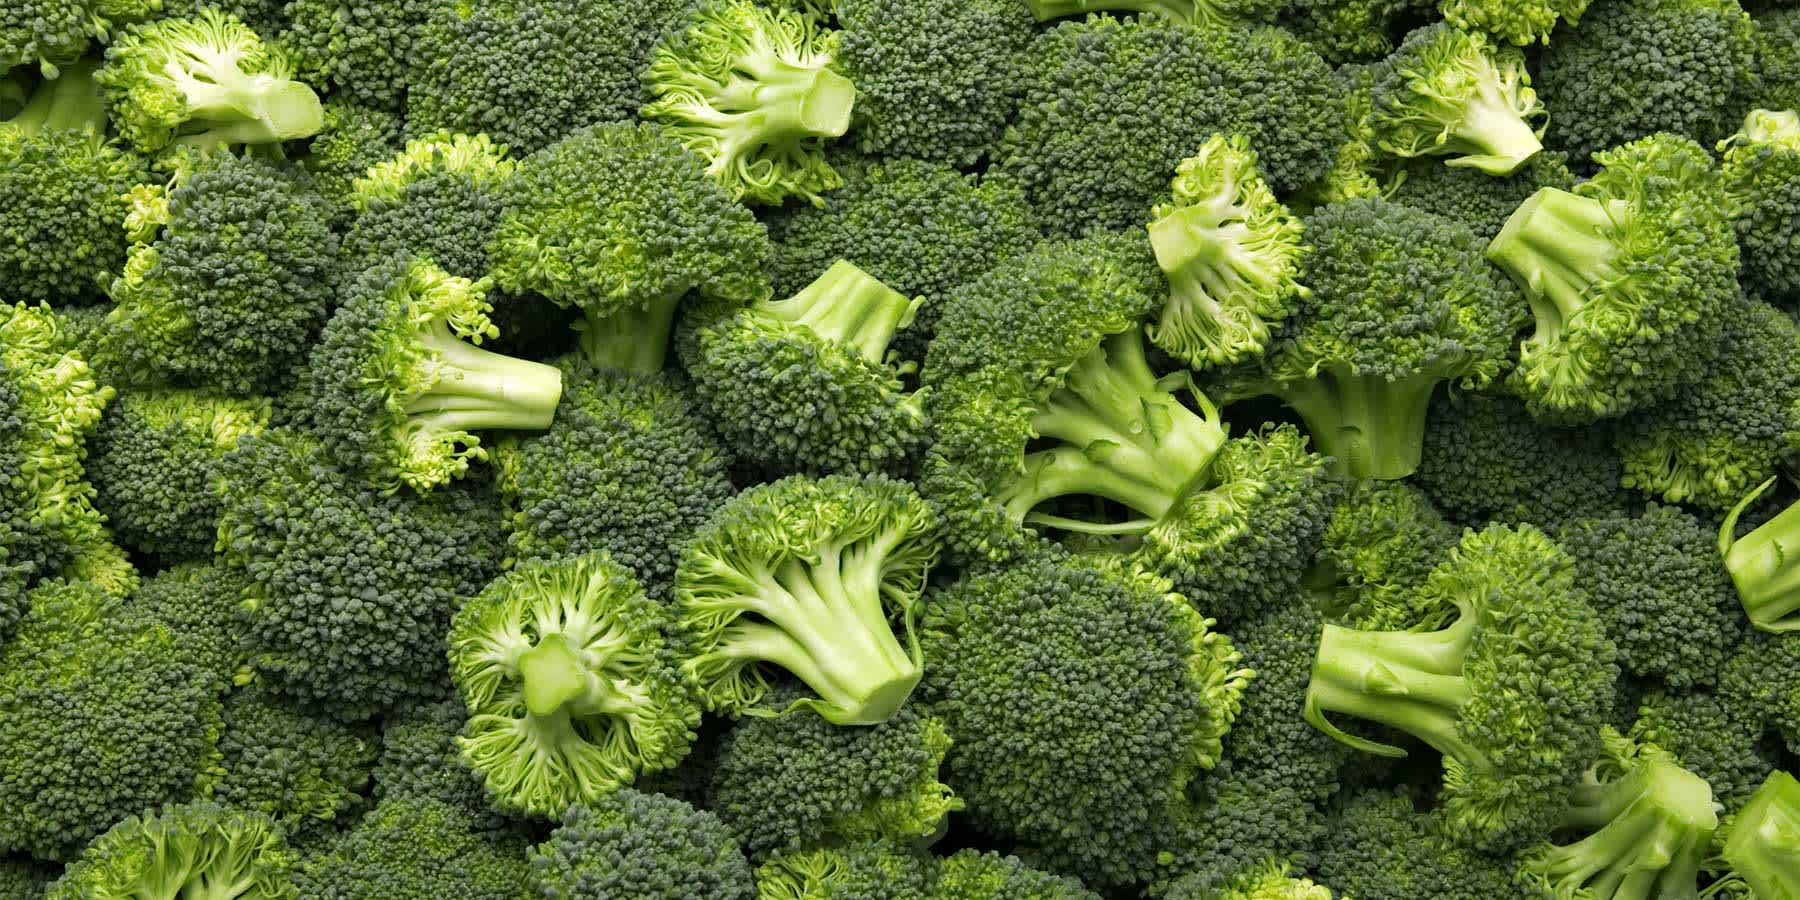 Broccoli as example of food good for prostate health